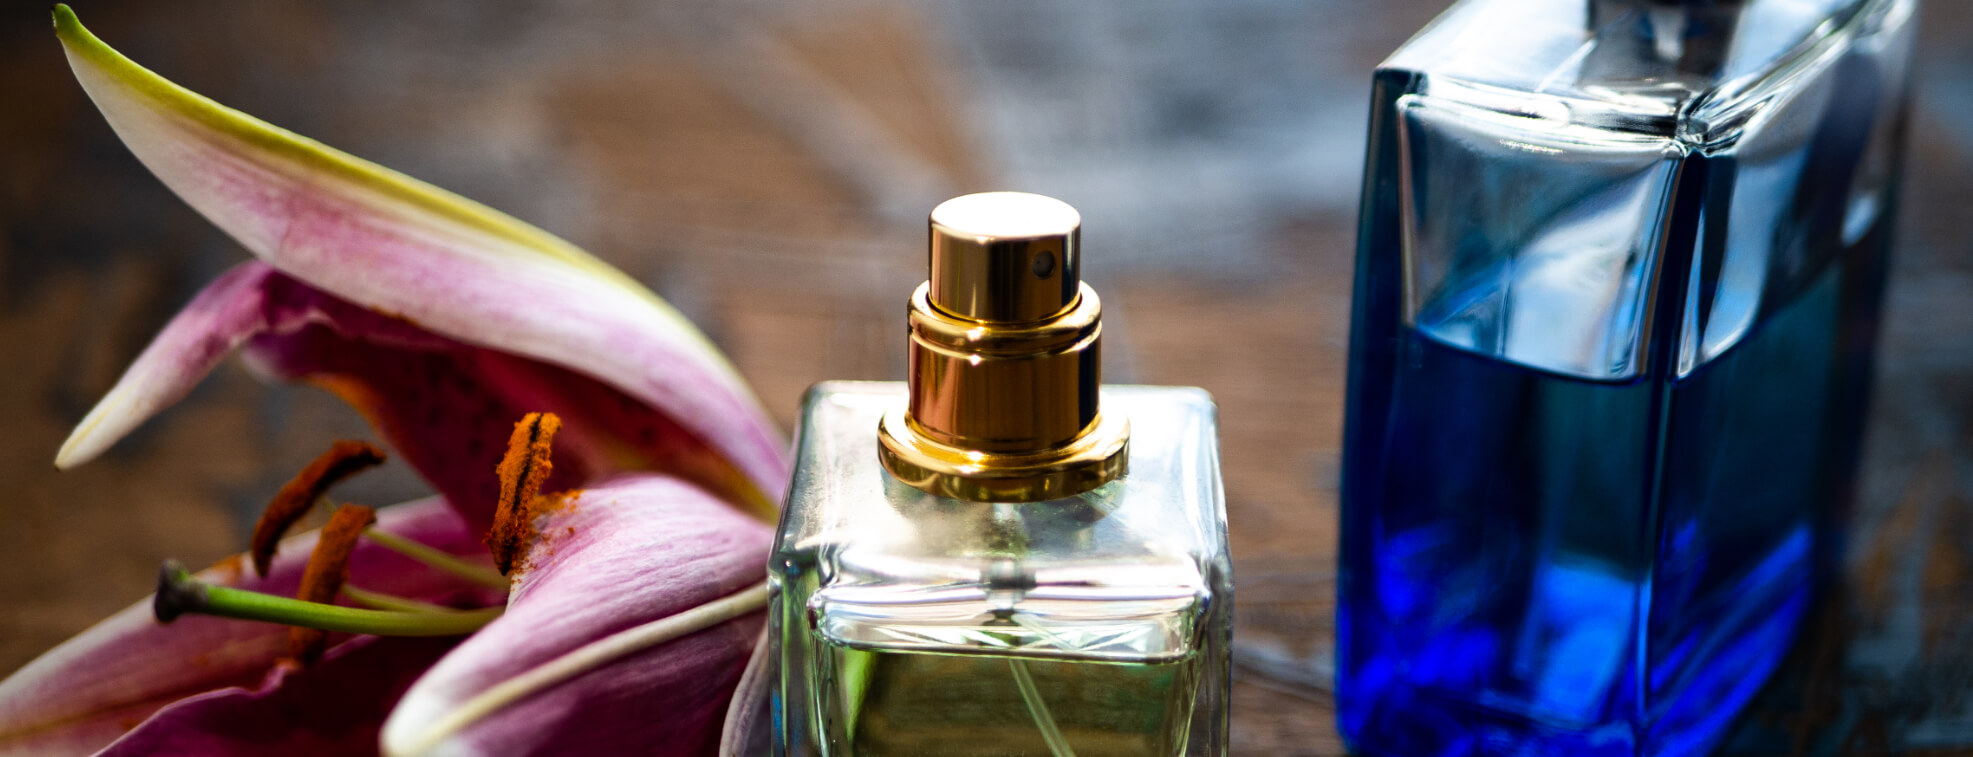 Spice up your Valentine's Day with a perfume